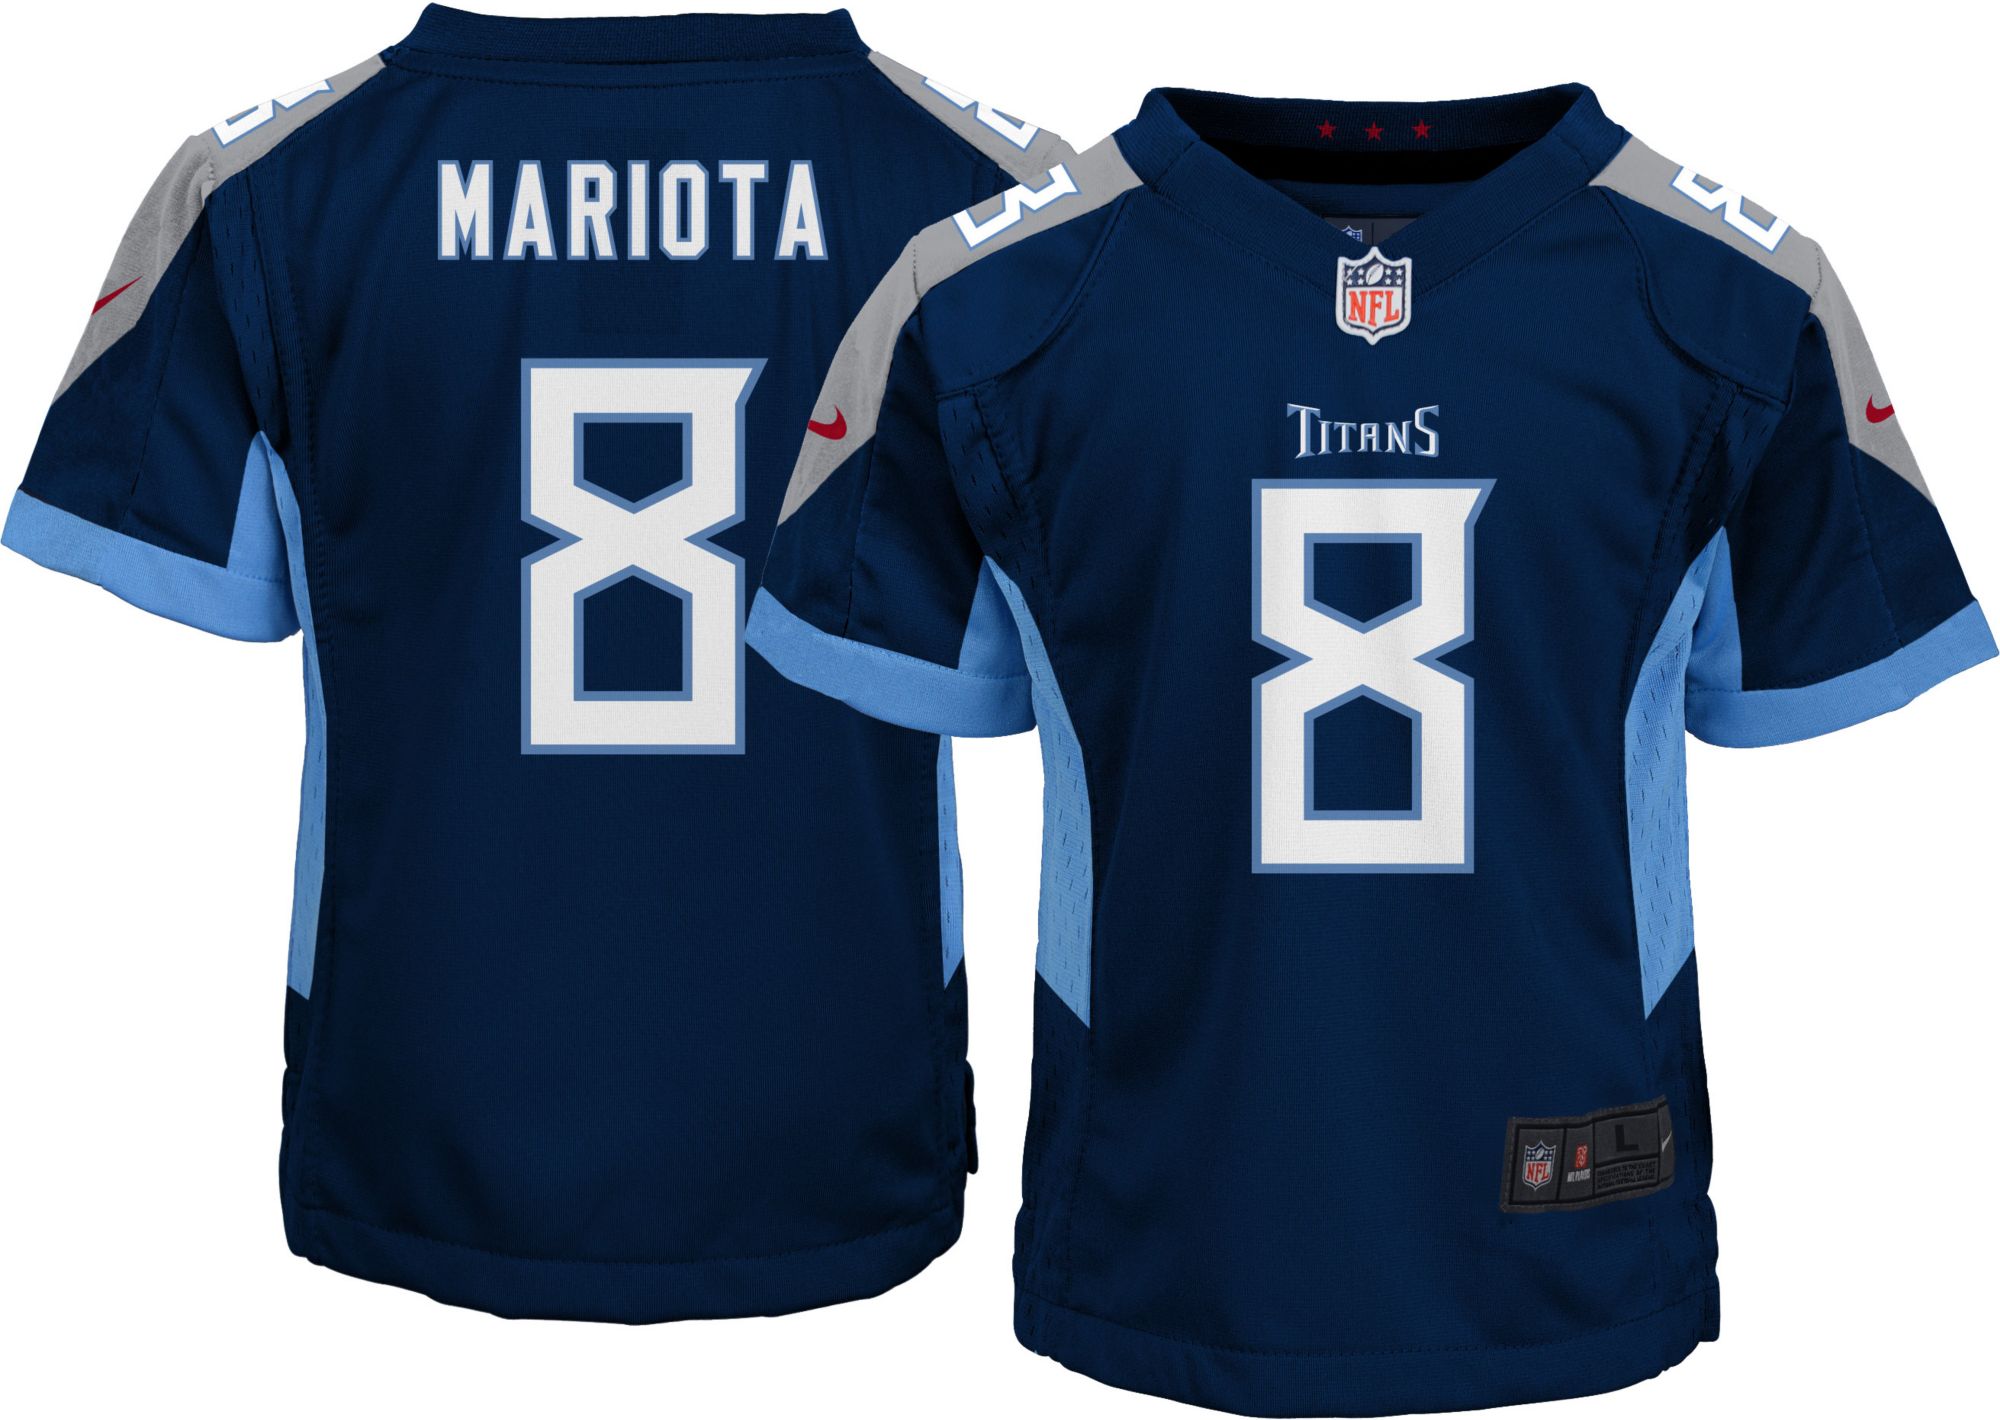 tennessee titans home jersey color